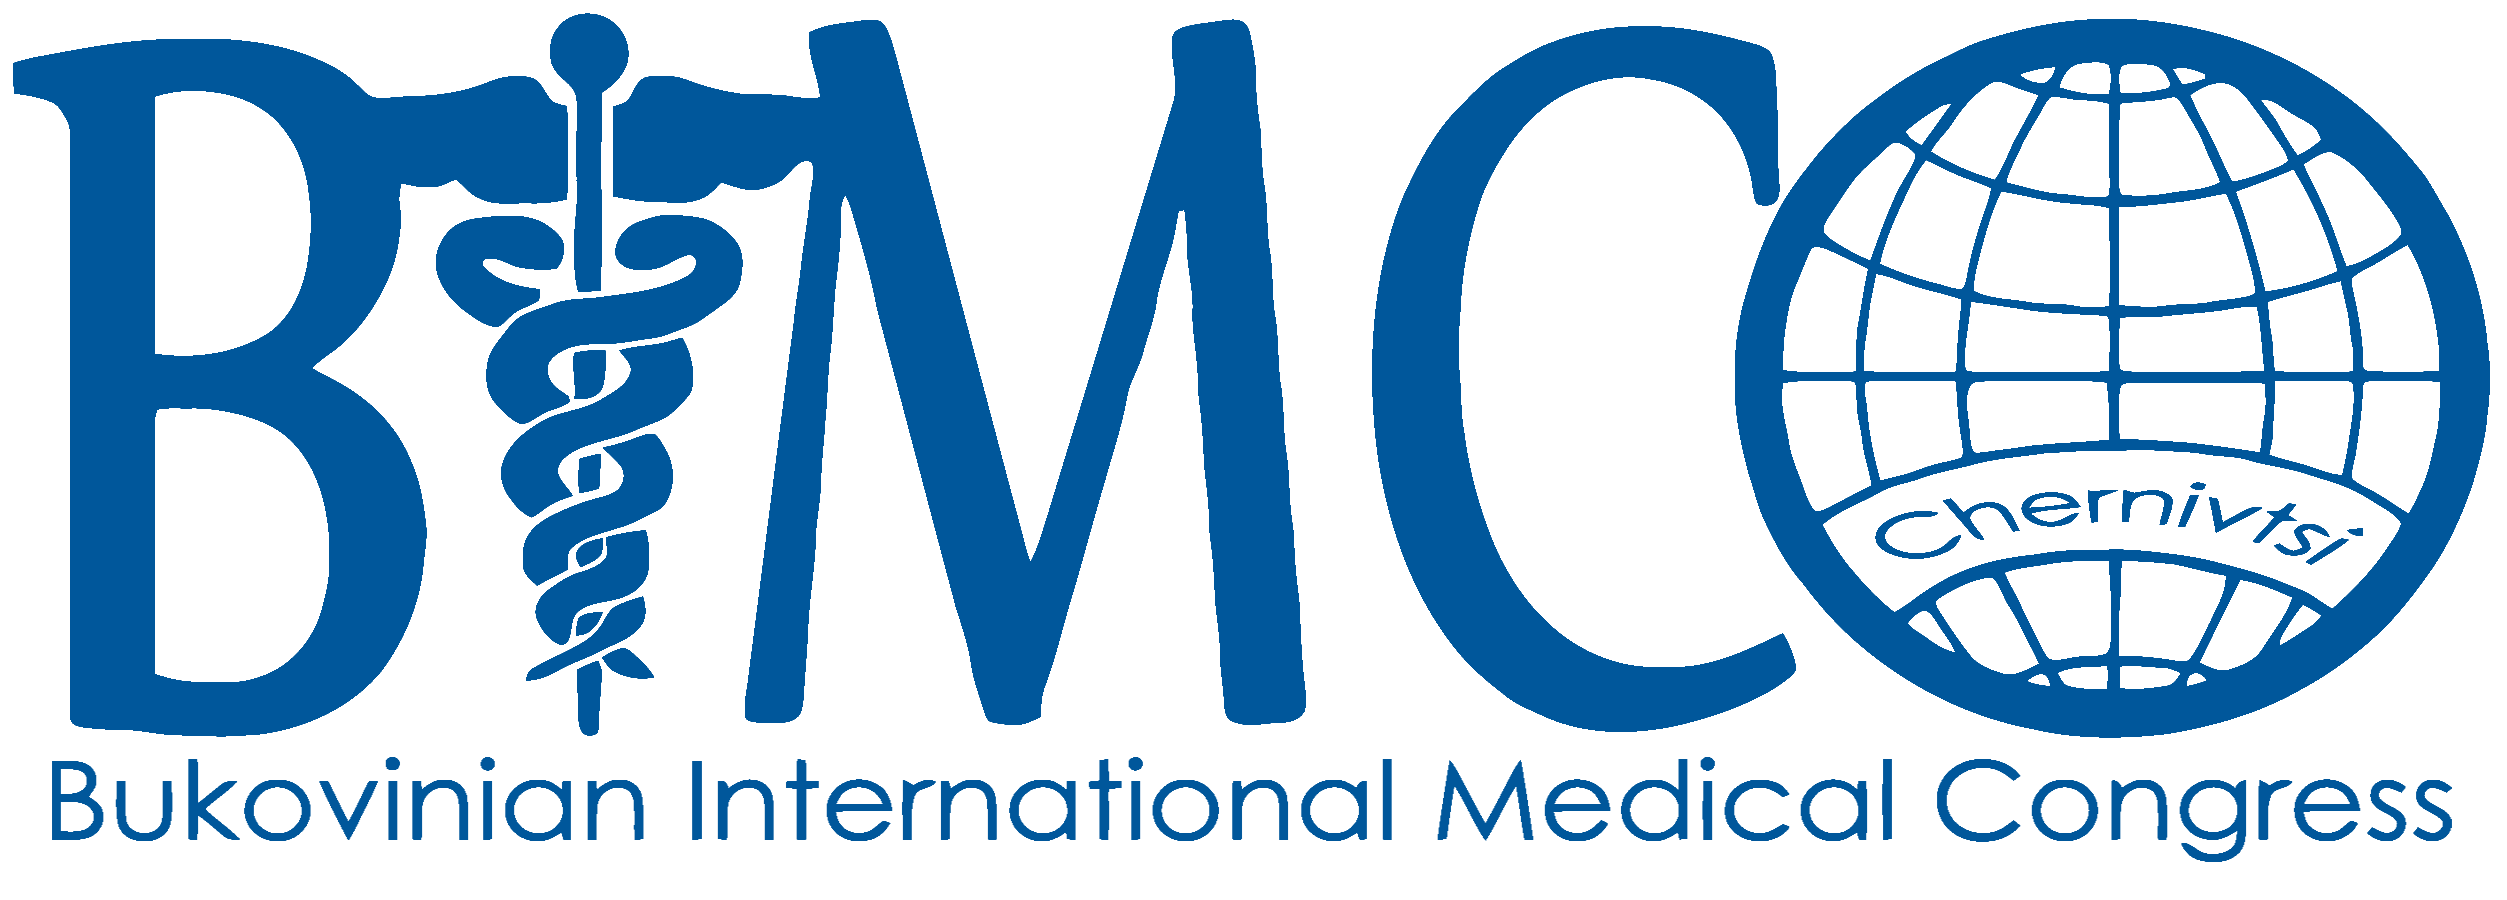 VI International Medical and Pharmaceutical Congress of Students and Young Scientists  BIMCO 2019 image